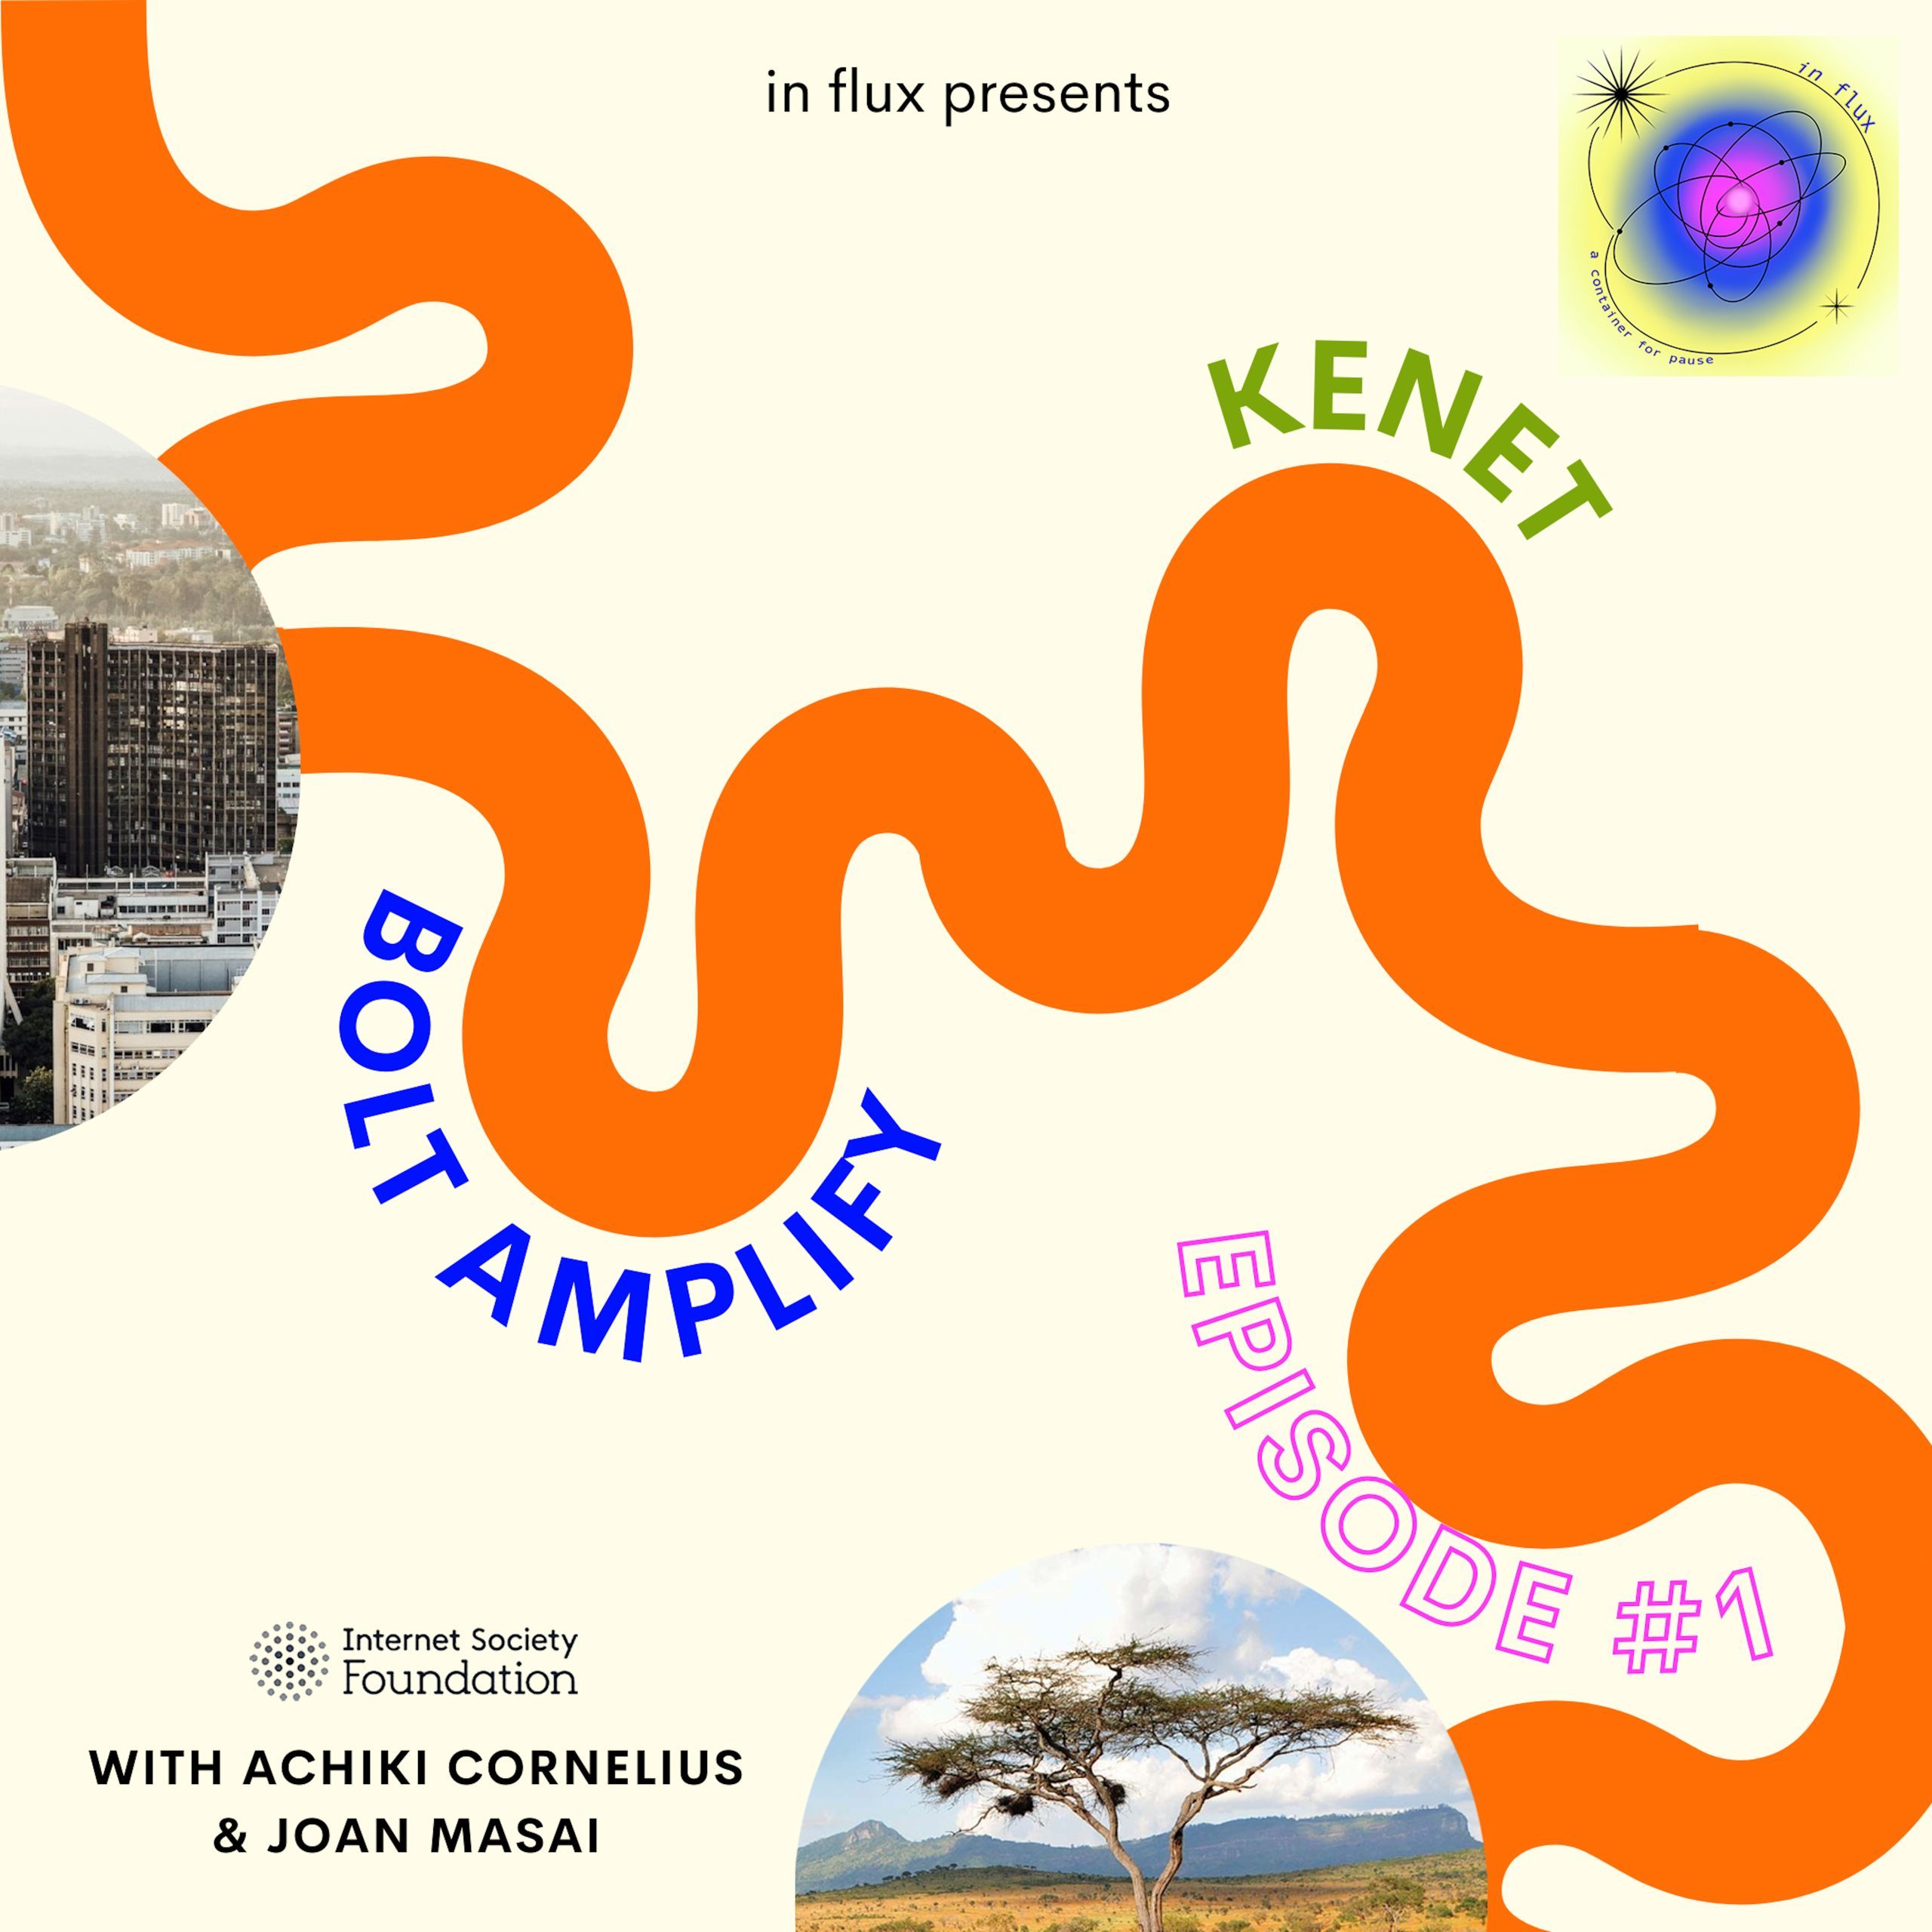 The image shows the cover of an episode called: Kenet Bolt Amplify.